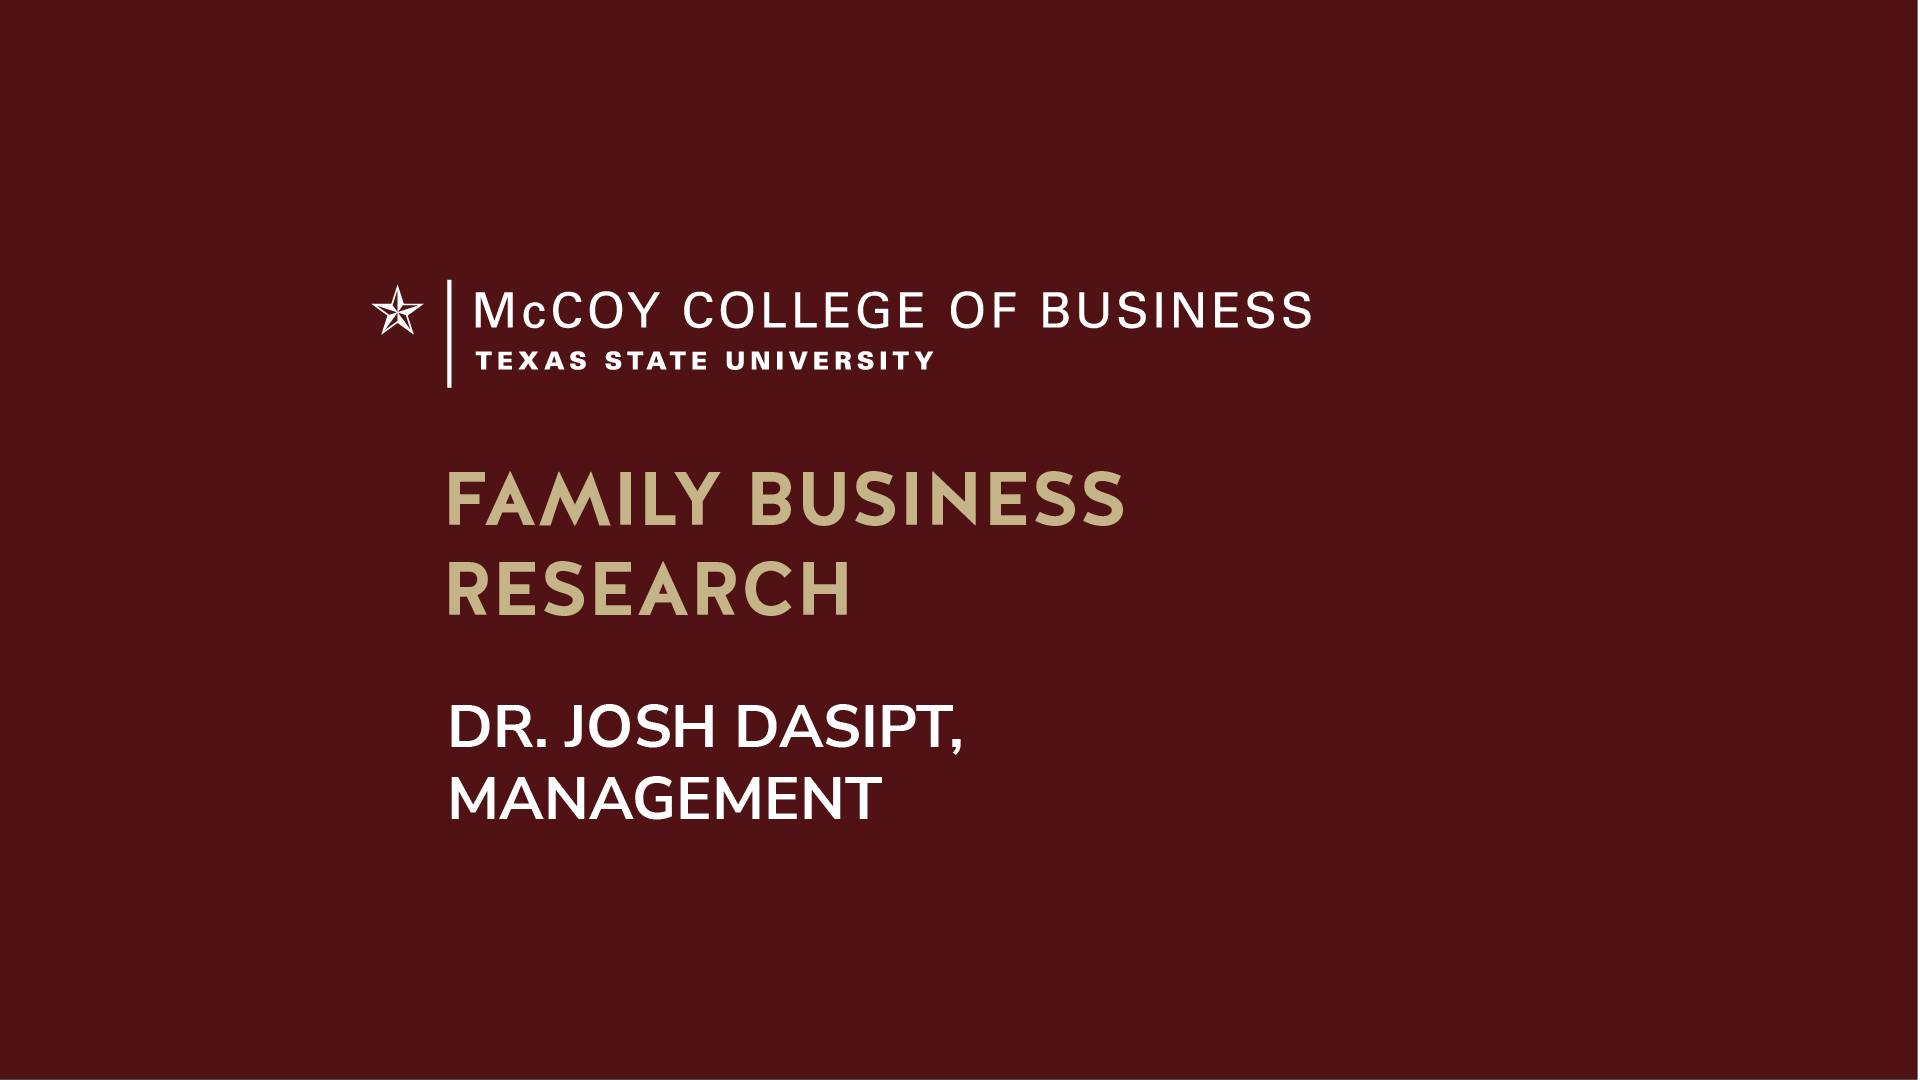 Dr. Josh Daspit speaks about Family Business Research